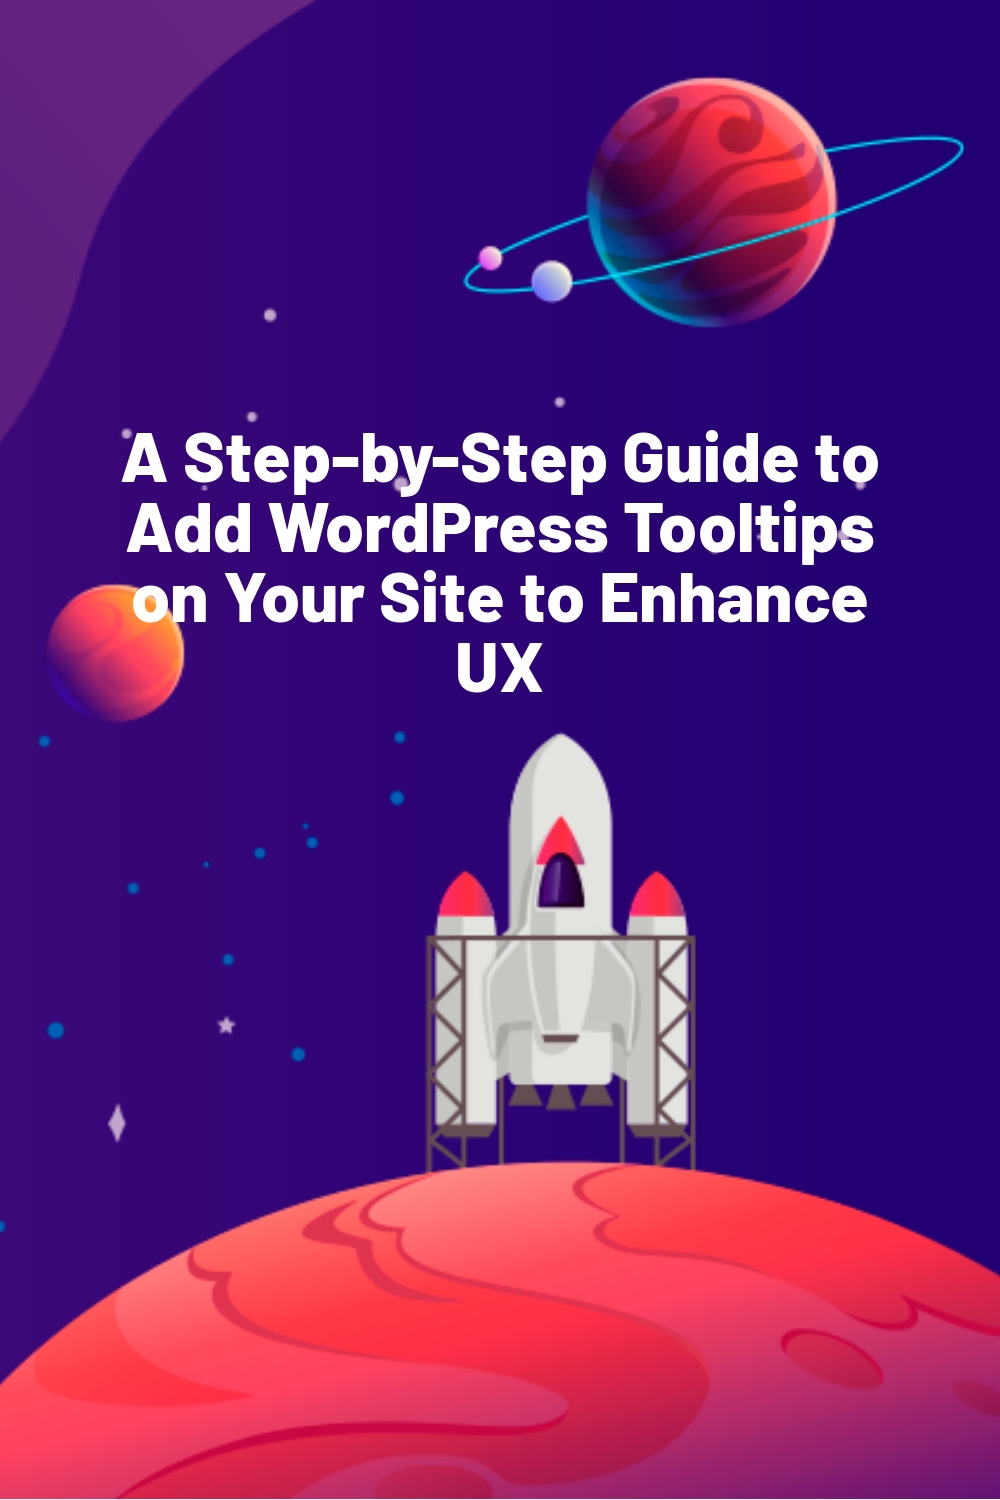 A Step-by-Step Guide to Add WordPress Tooltips on Your Site to Enhance UX